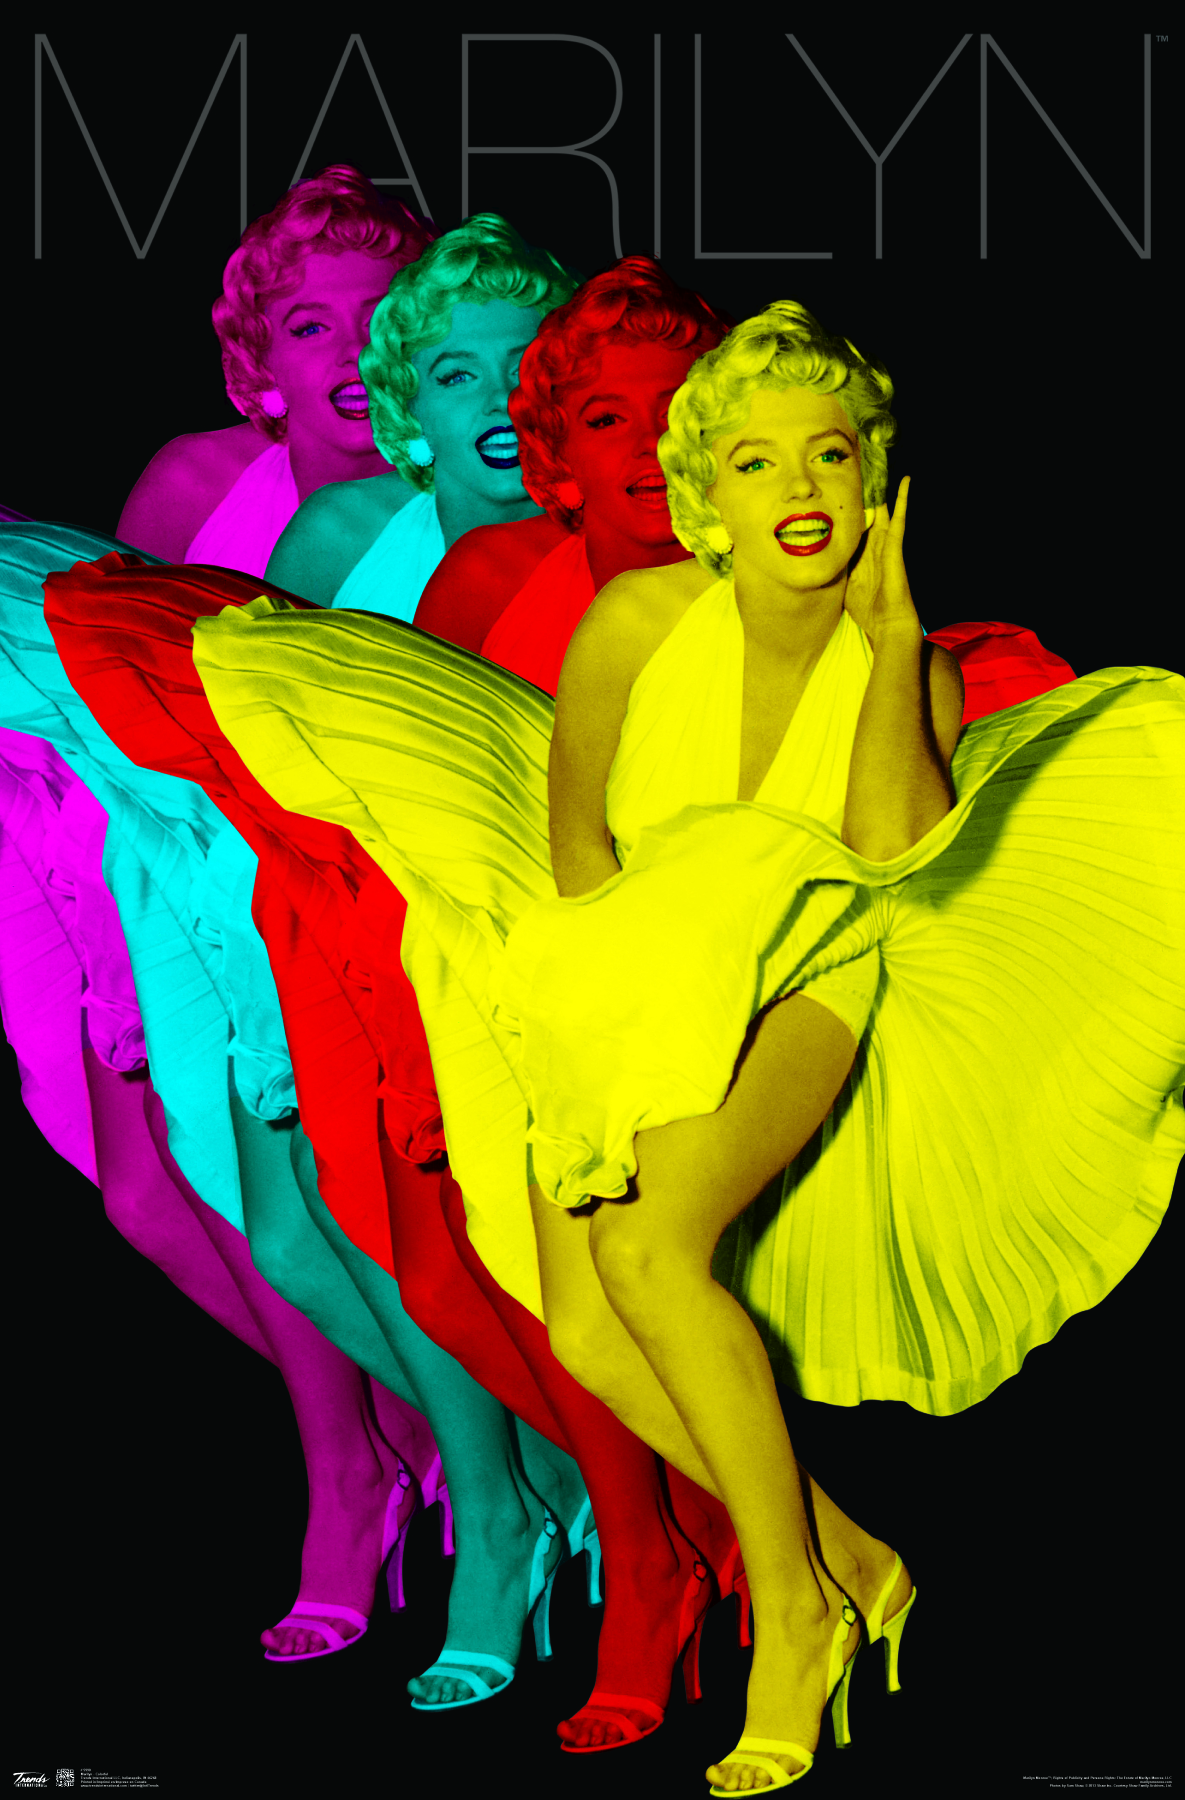 Trends International Marilyn Monroe Colorful Wall Poster 22.375" x 34" - image 1 of 2